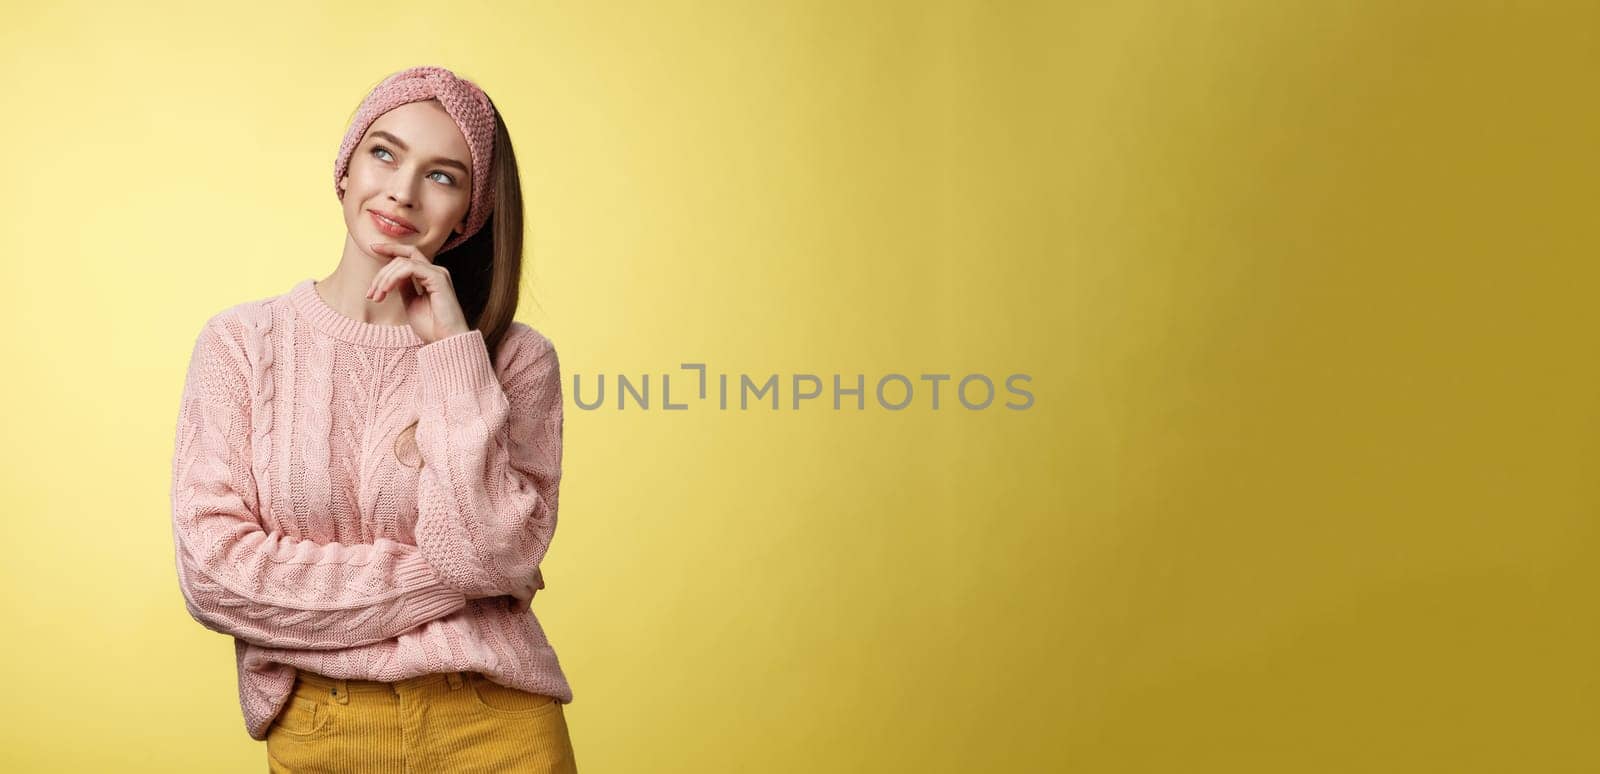 Dreamy attractive and stylish schoolgirl in knitted warm sweater, headband, thinking as smiling satisfied and devious having idea, looking at upper left corner thoughtful, daydreaming, planning.